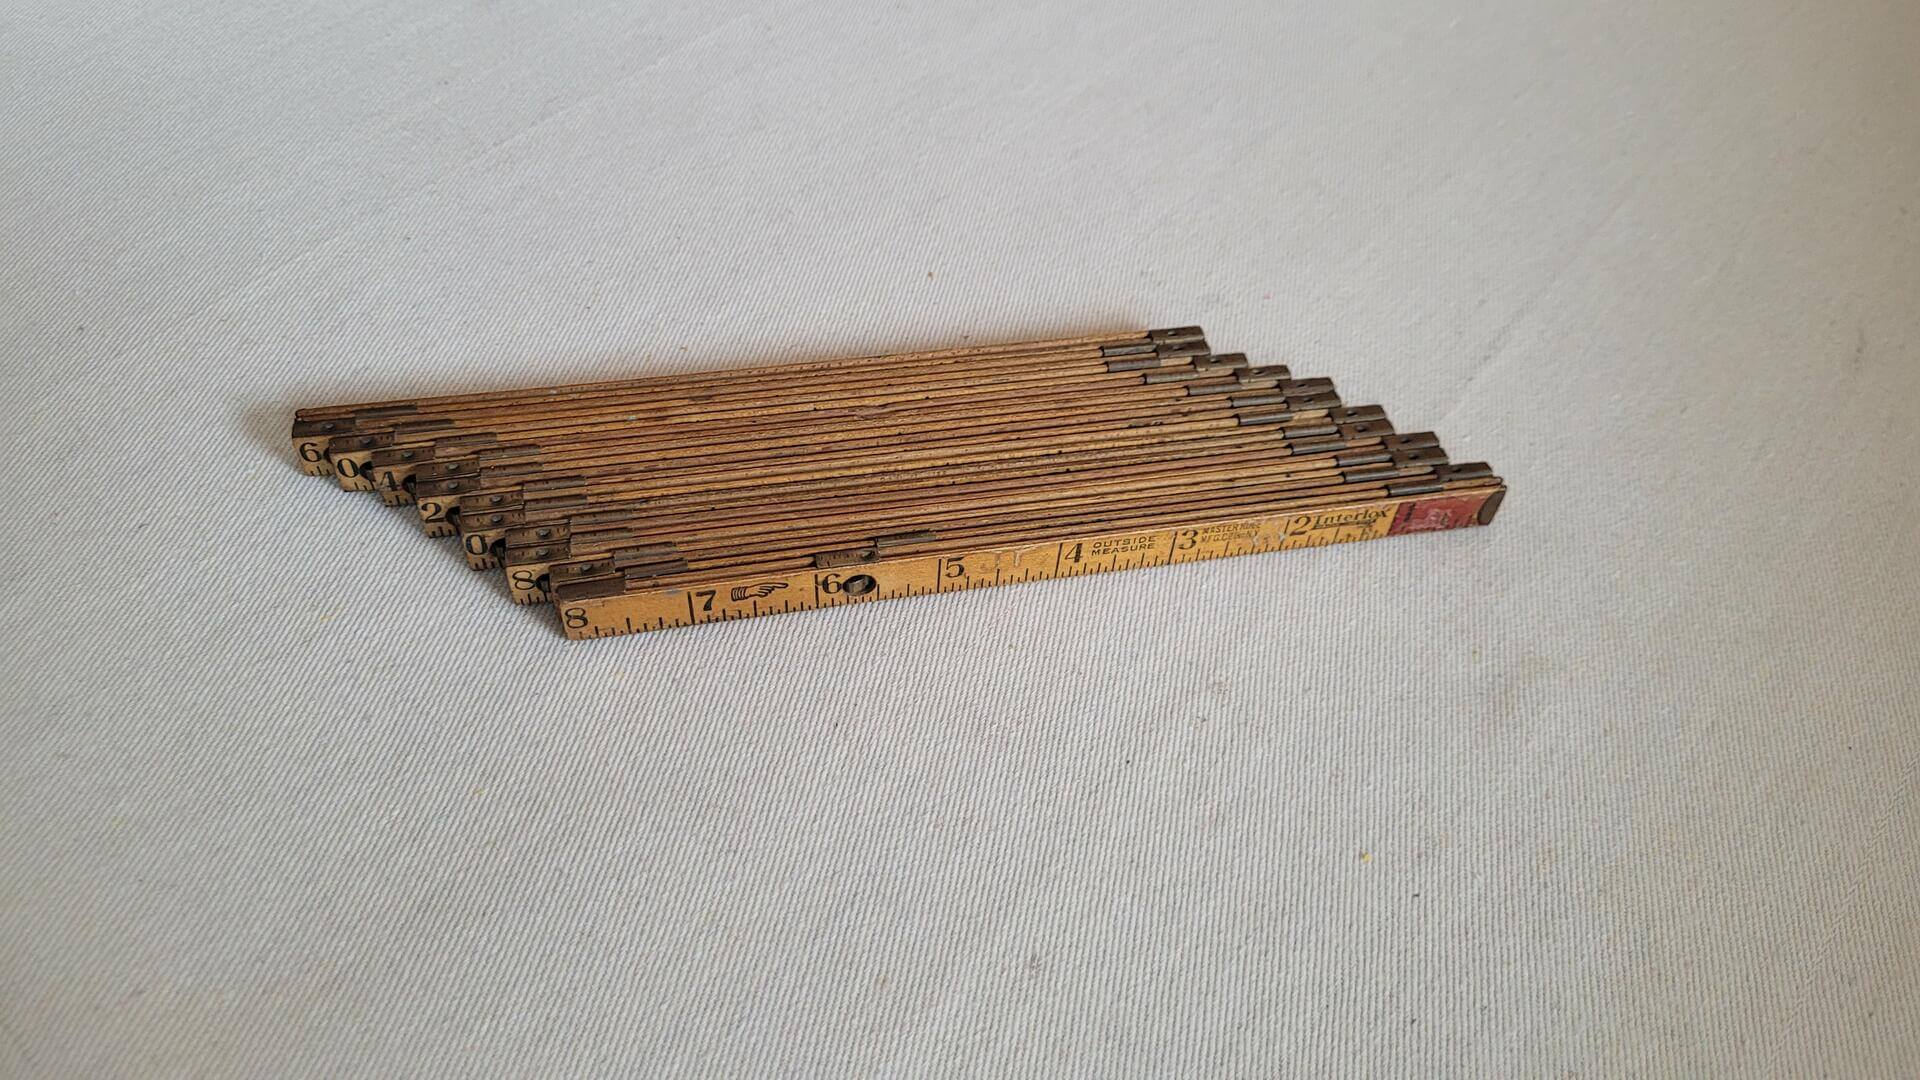 Antique woodworking Interlox No. 106 wooden slide rule by Master Rule Mfg Co from NY. Vintage made in USA collectible marking and measuring carpentry tools